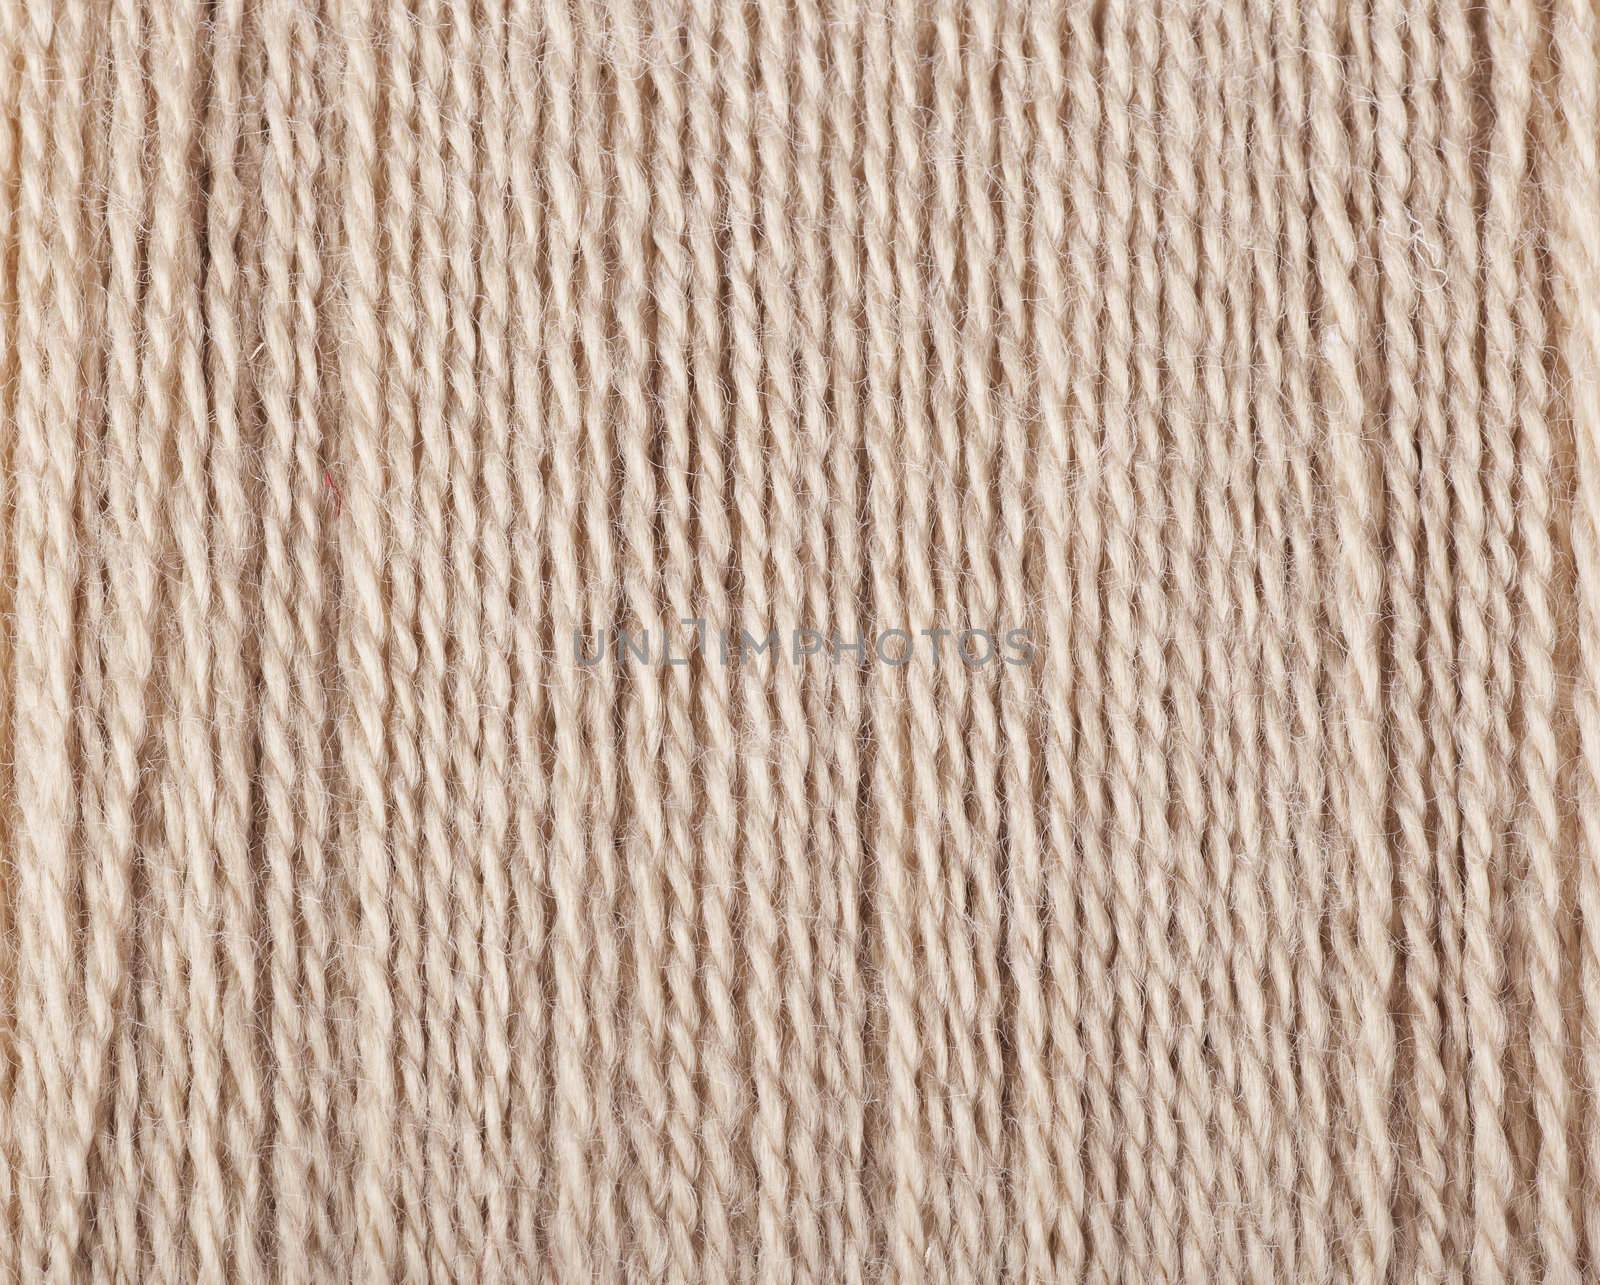 Tan threads ready for sewing or knitting.